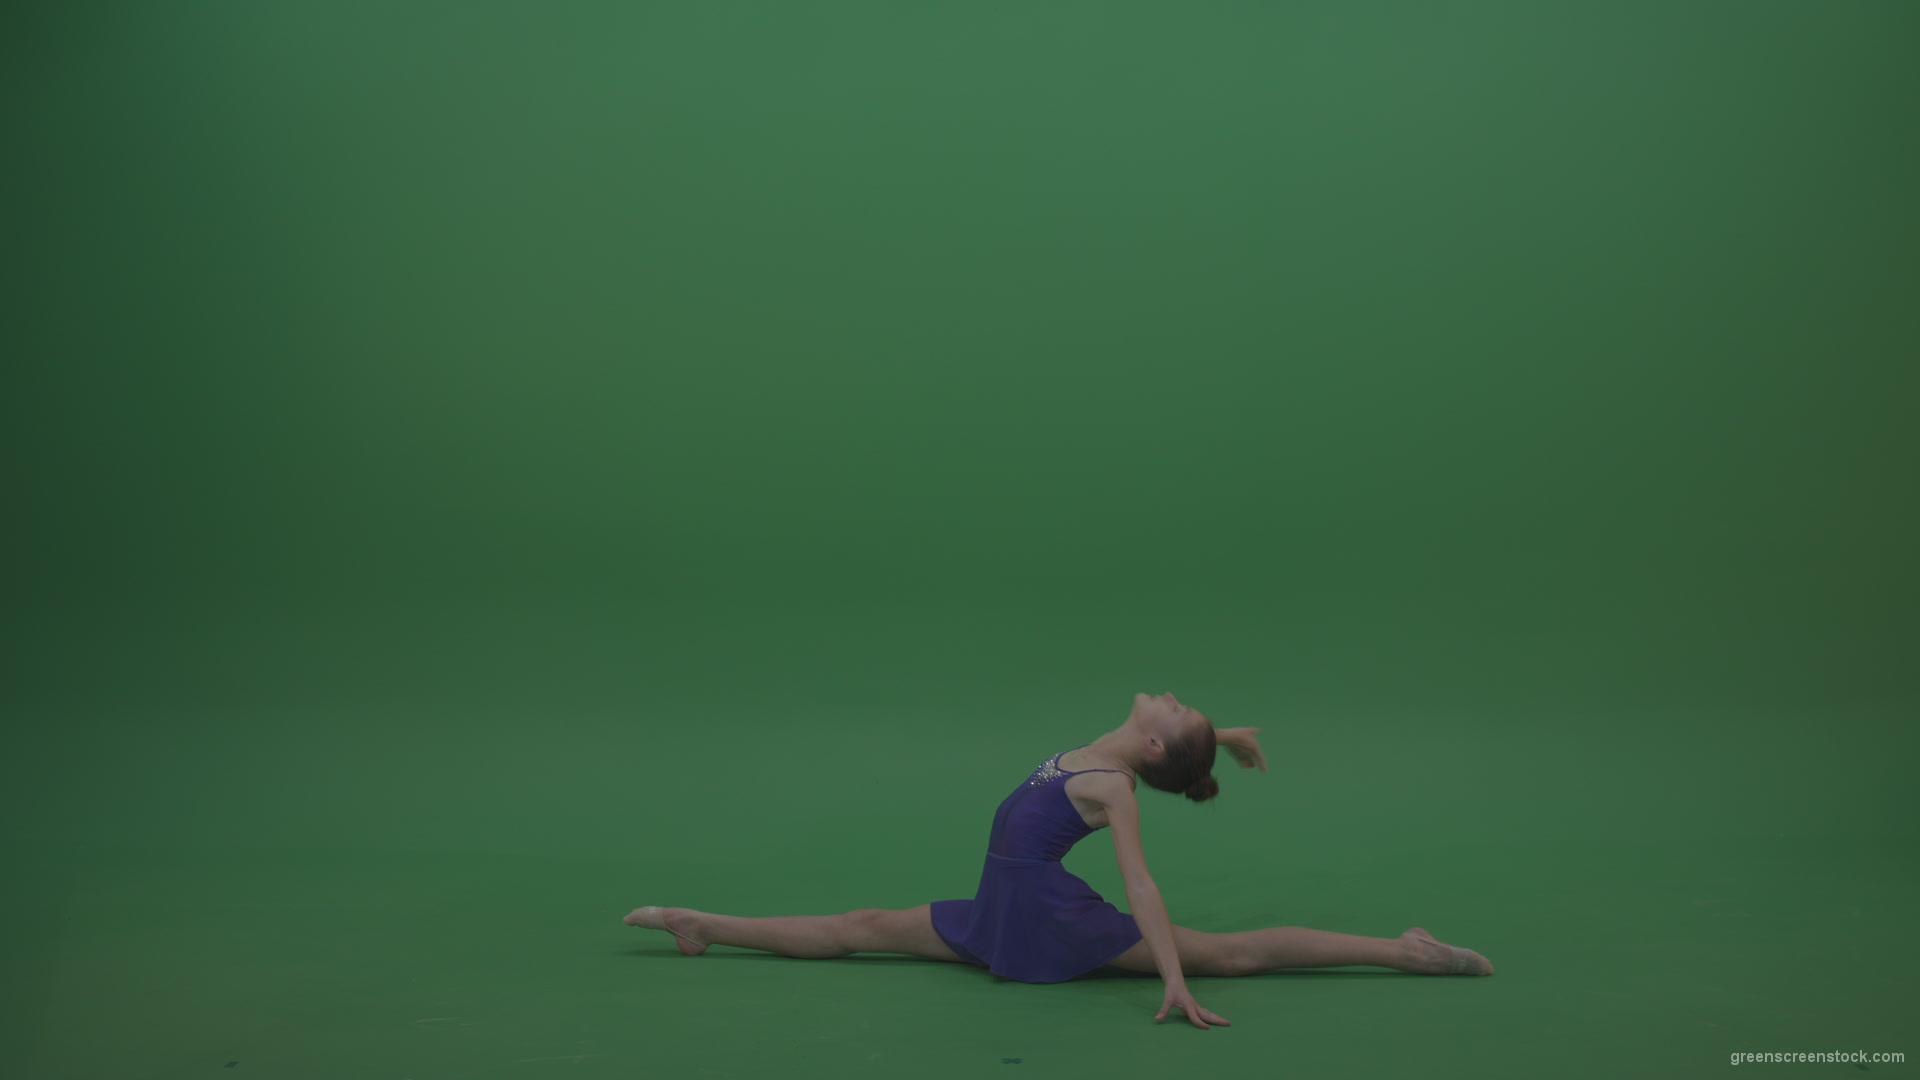 Cute_Athletic_Gymnast_Performing_Awesome_Split_Technique_Spin_Combination_With_Back_Handspring_On_Green_Screen_Chroma_Key_Wall_Background_005 Green Screen Stock